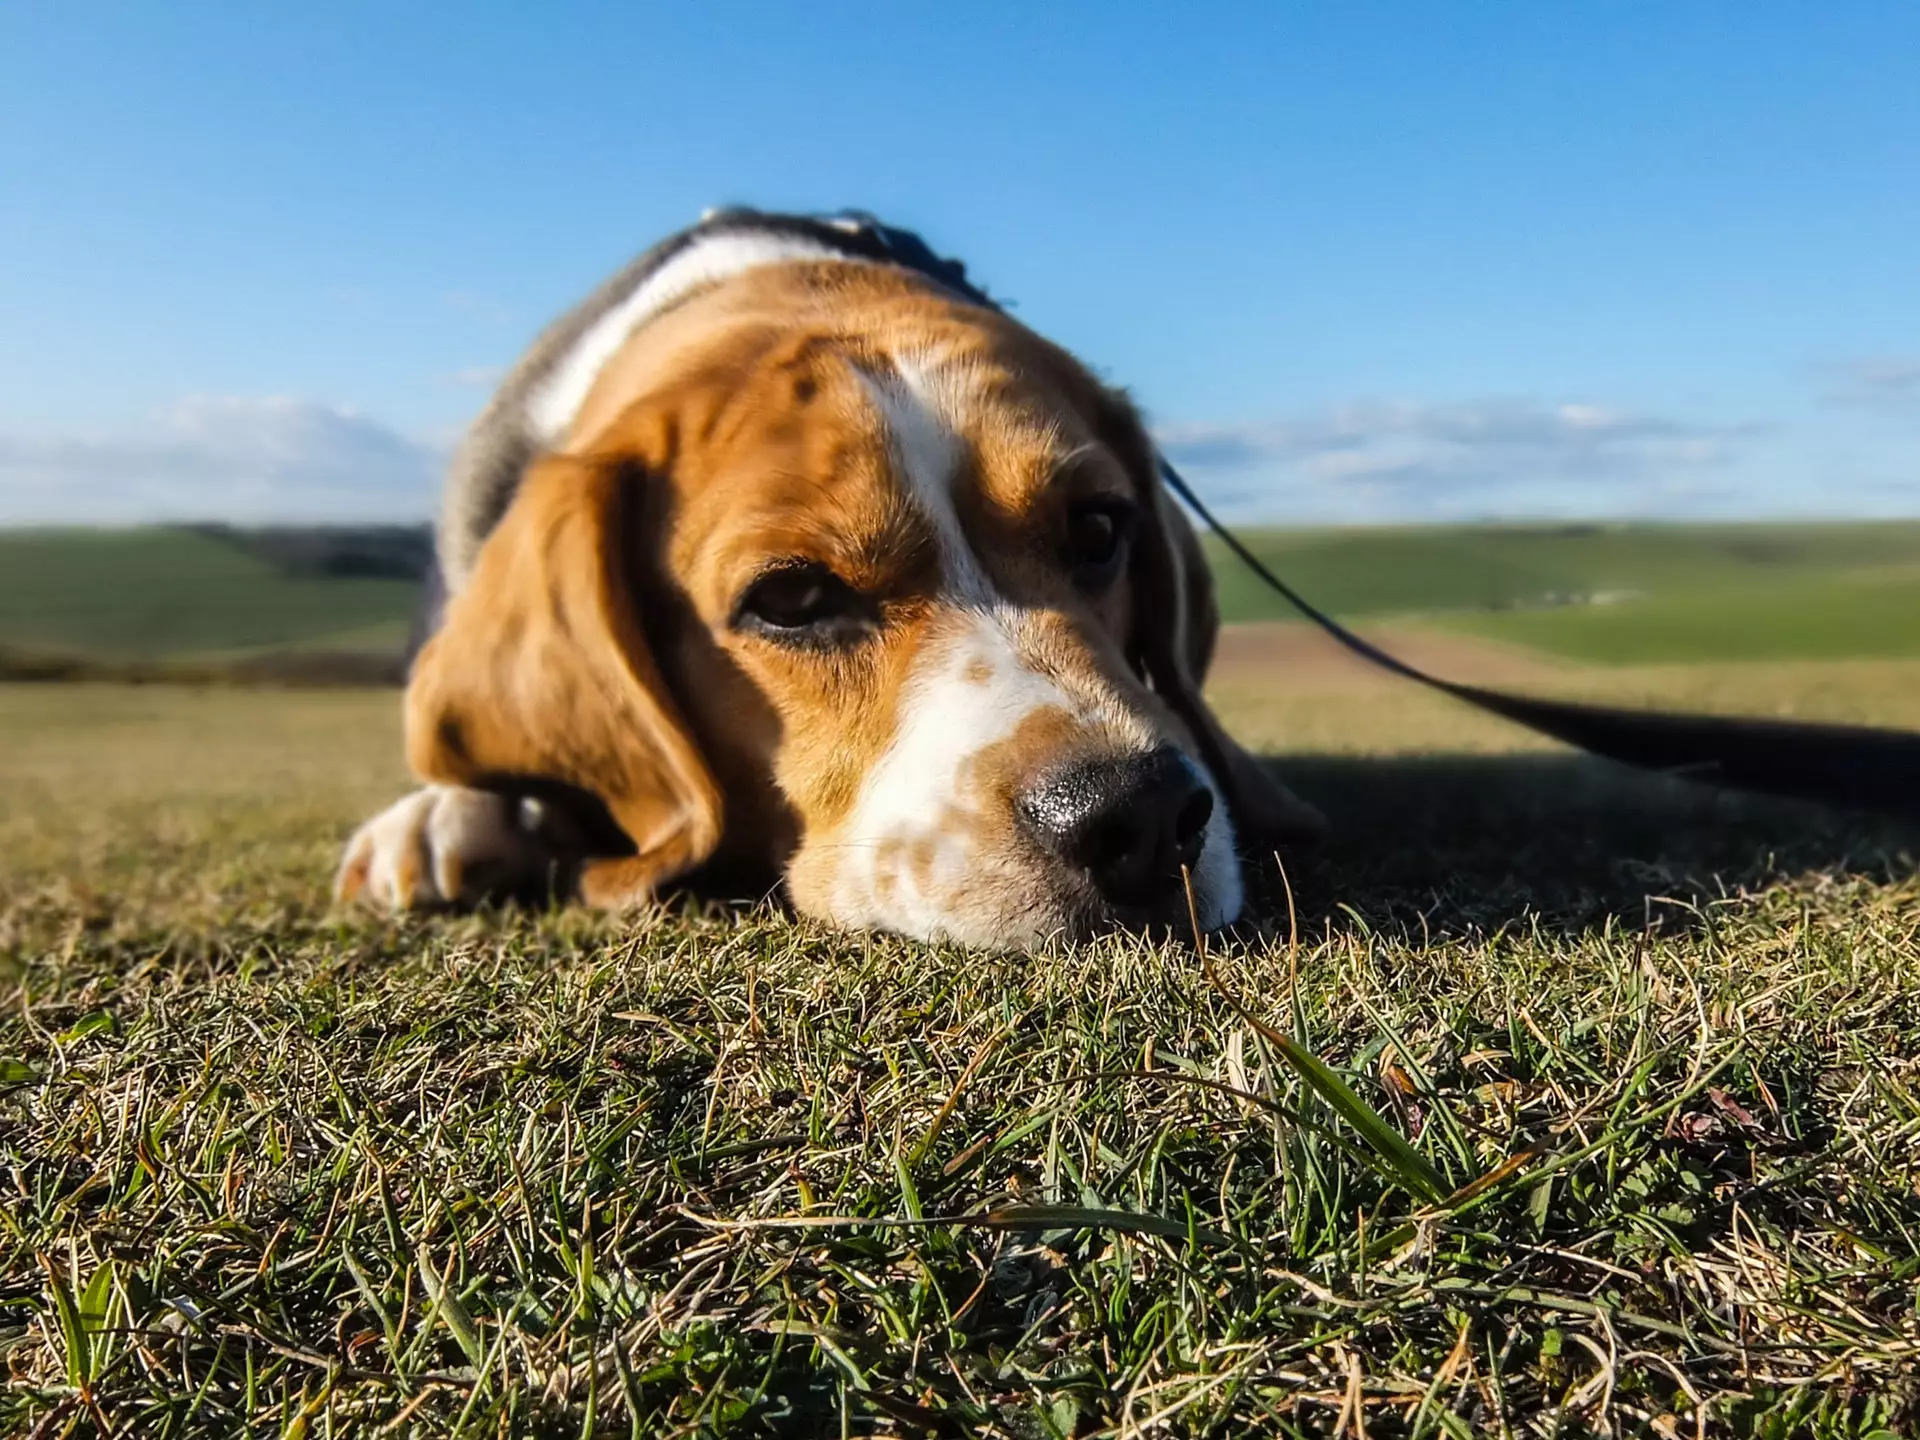 Dogs don't respond well to lead pulling or shouting (